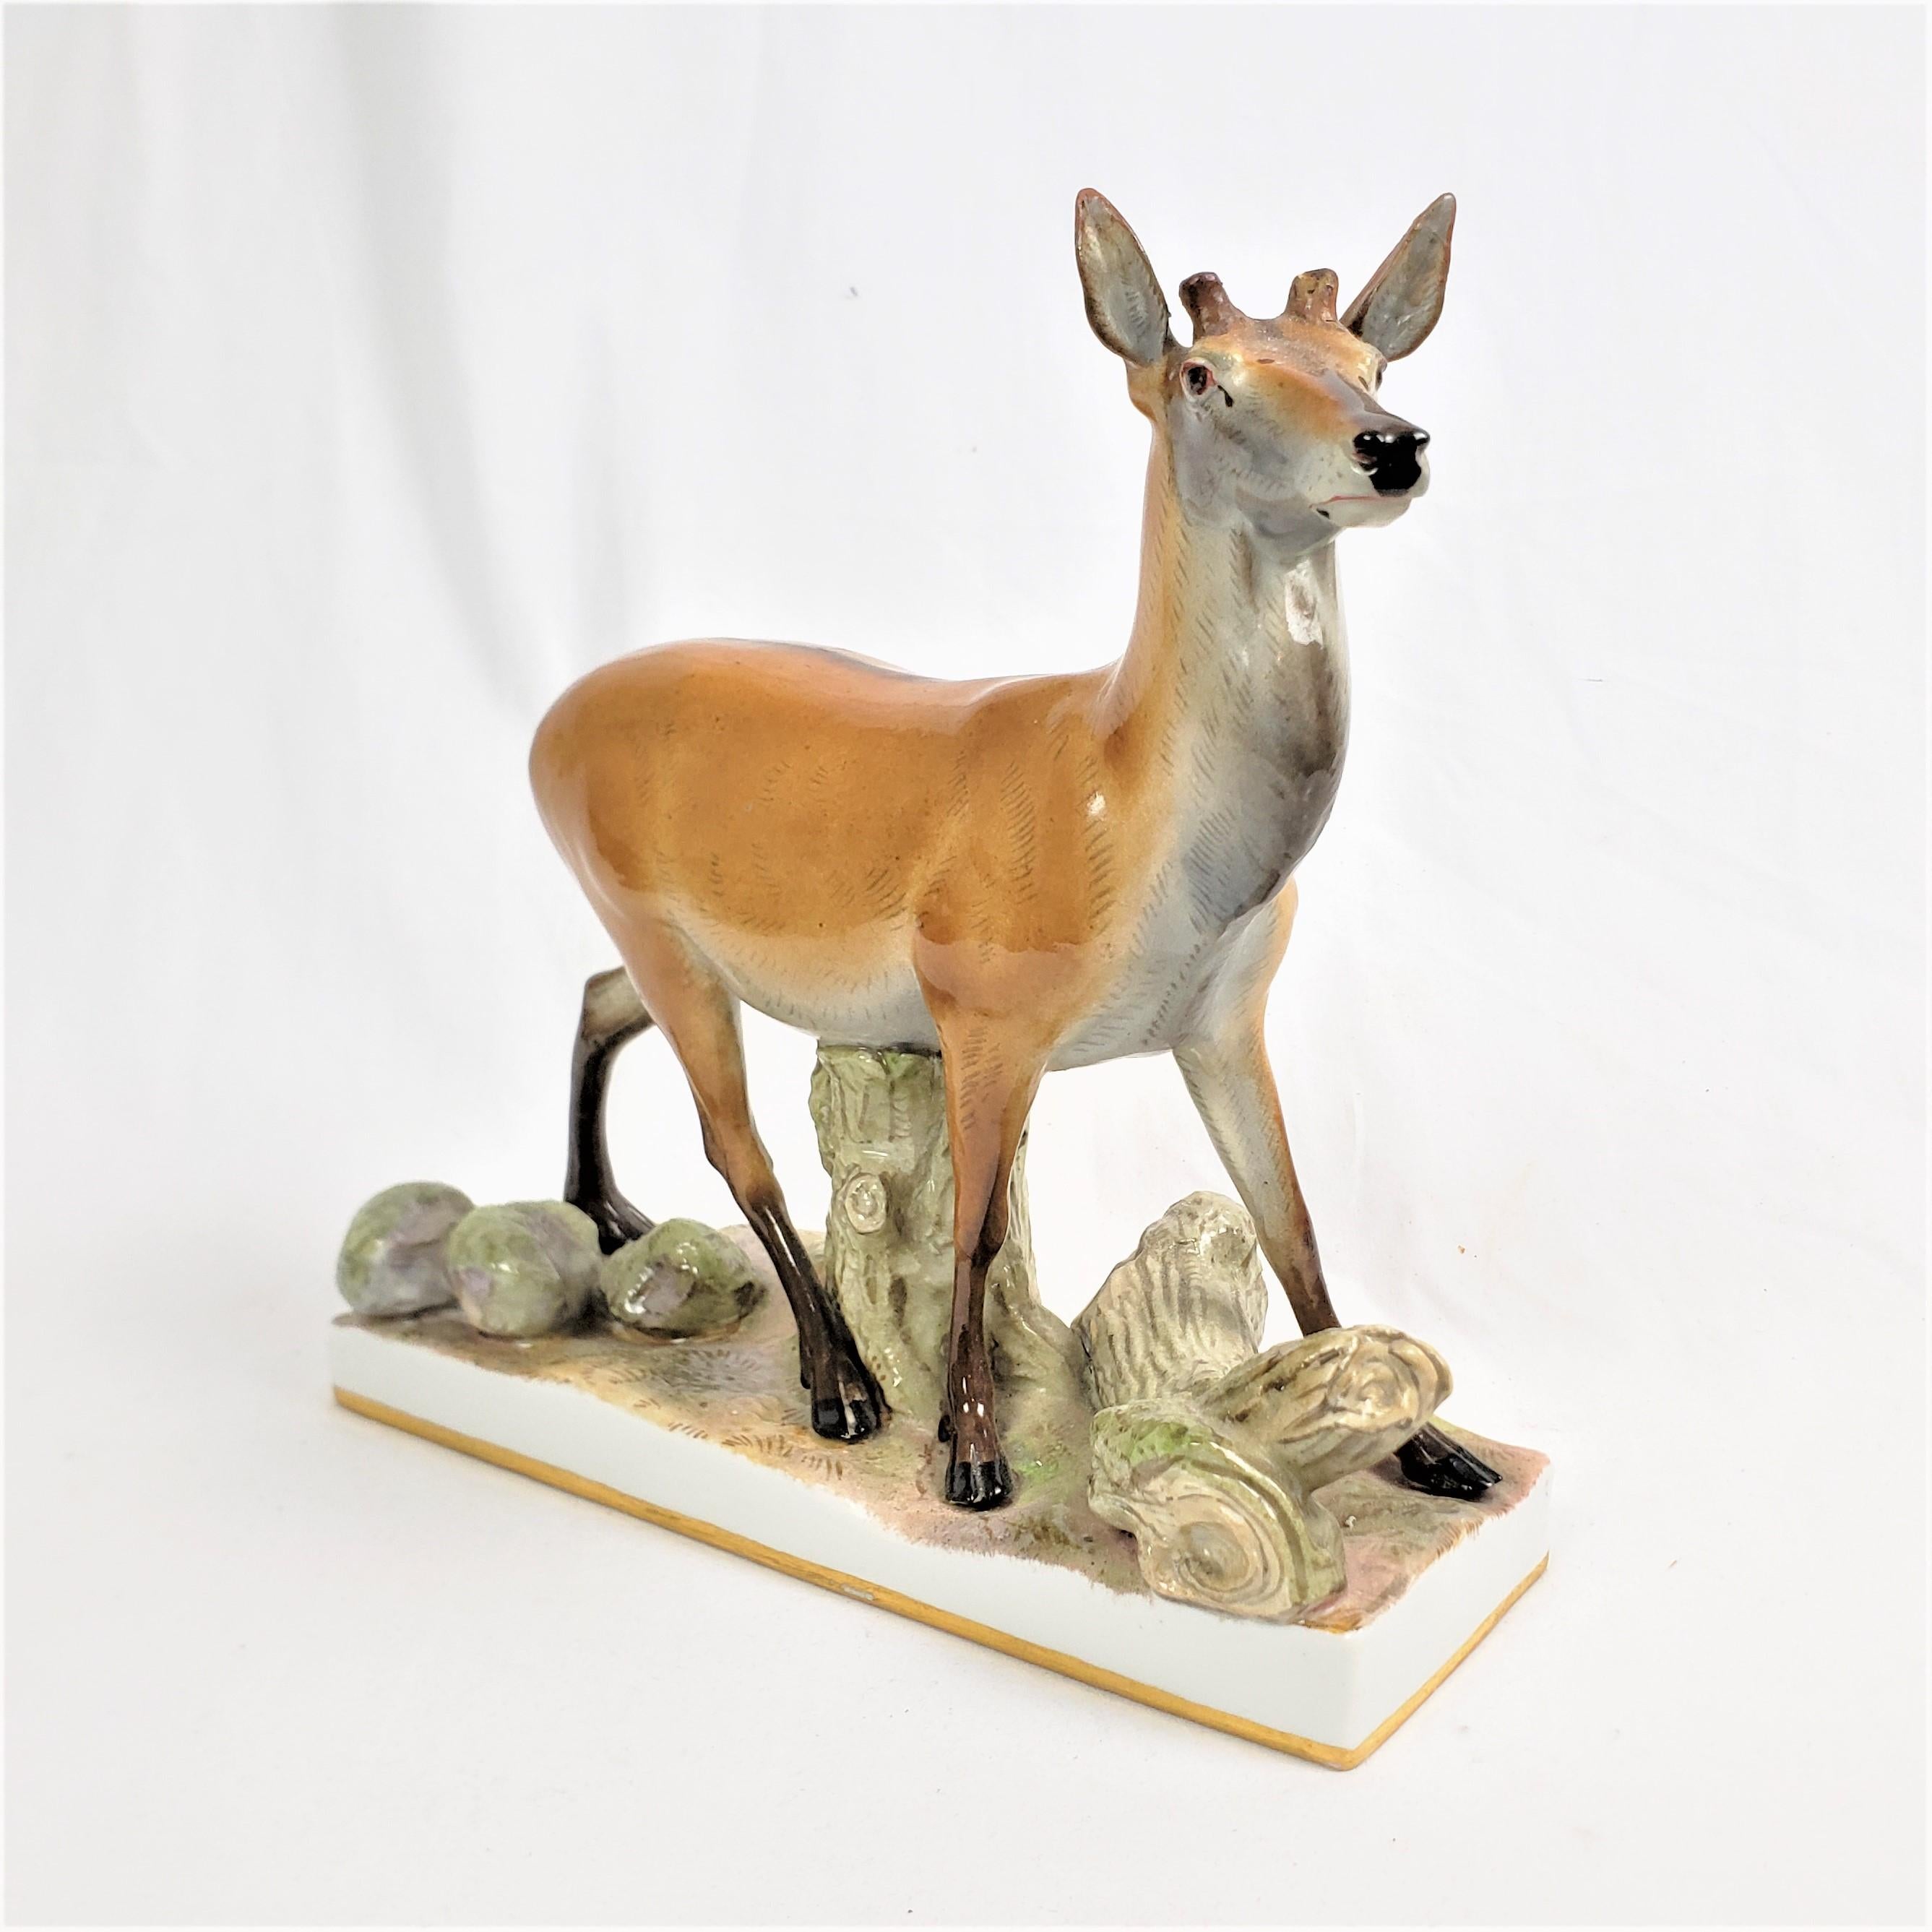 This large antique figurine was made by the renowned Meissen factory of Germany in approximately 1880 in the period realistic style. The figurine or sculpture is composed of porcelain and depicts a standing deer resting his belly on a stump. The